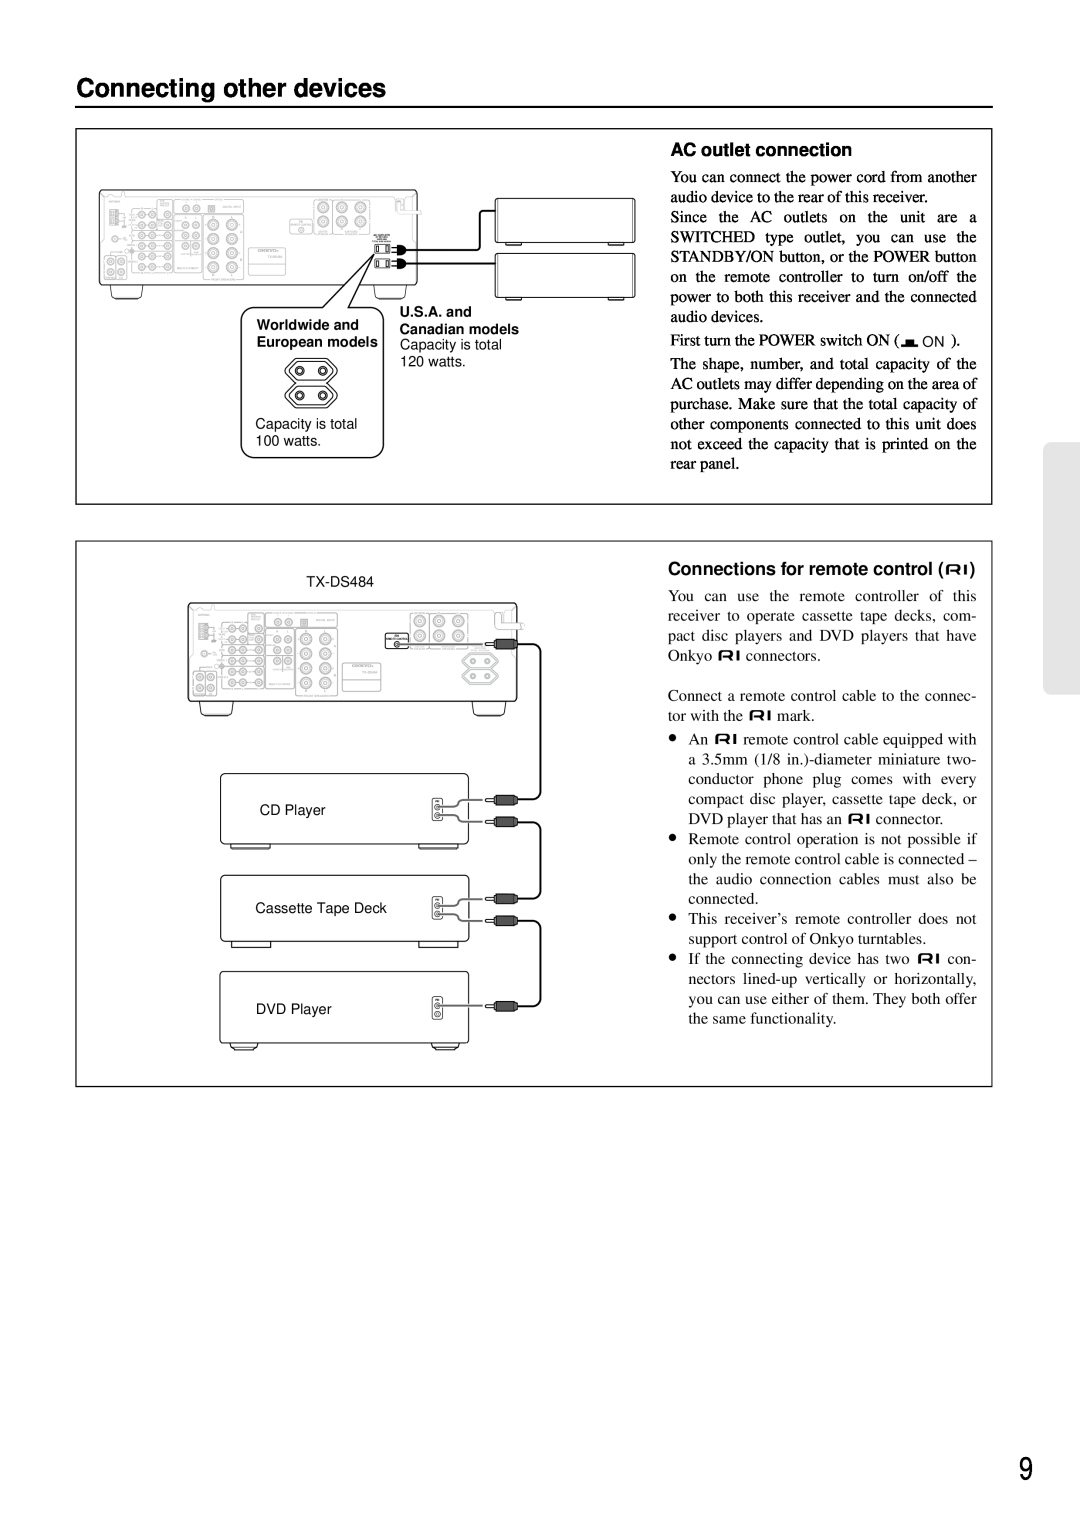 Onkyo TX-DS484 instruction manual Connecting other devices, AC outlet connection, Connections for remote control 